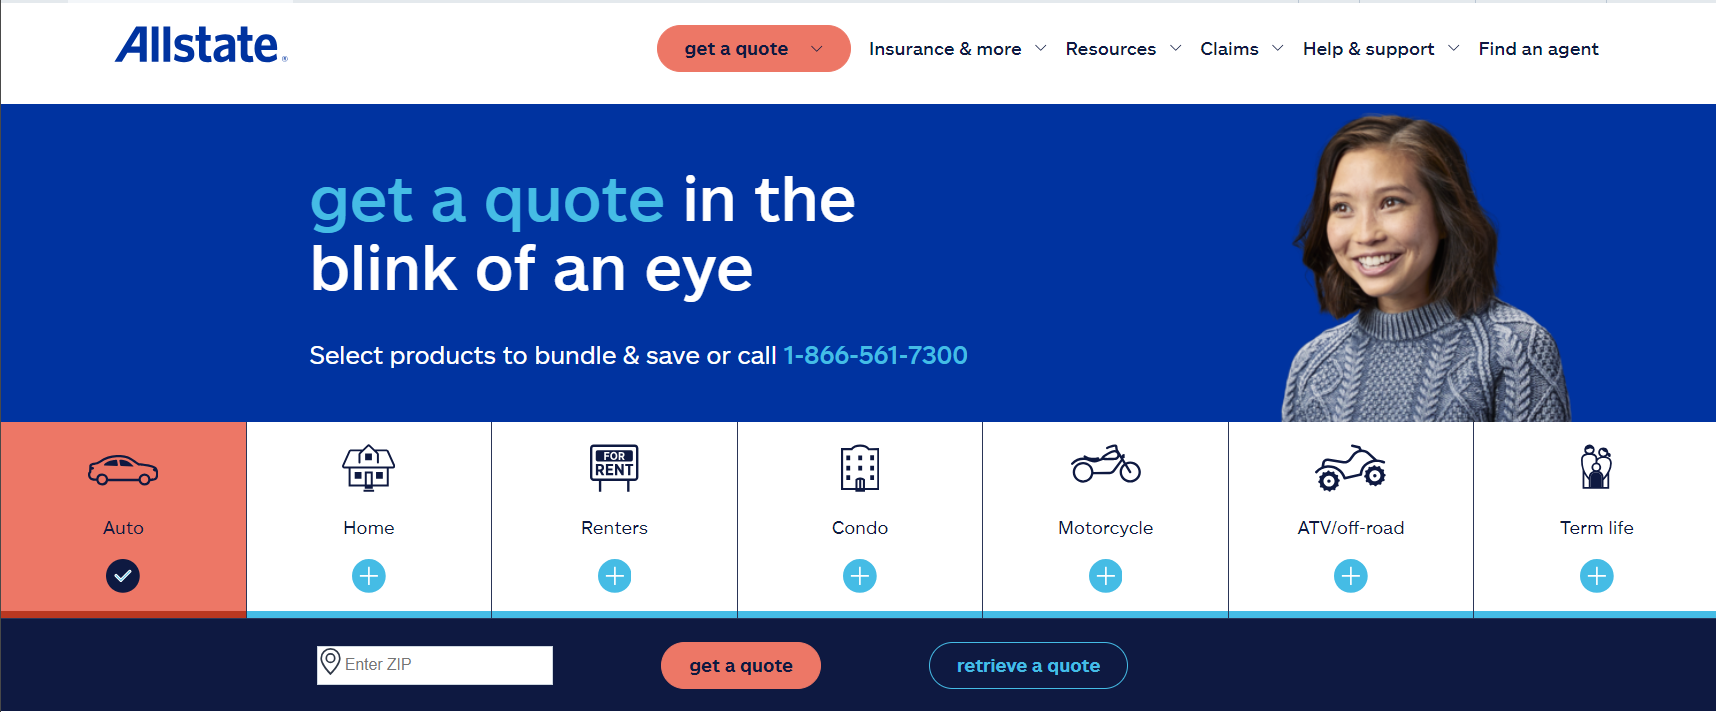 Allstate Site Screenshot: Best Auto Insurance for Limited-Use Vehicles